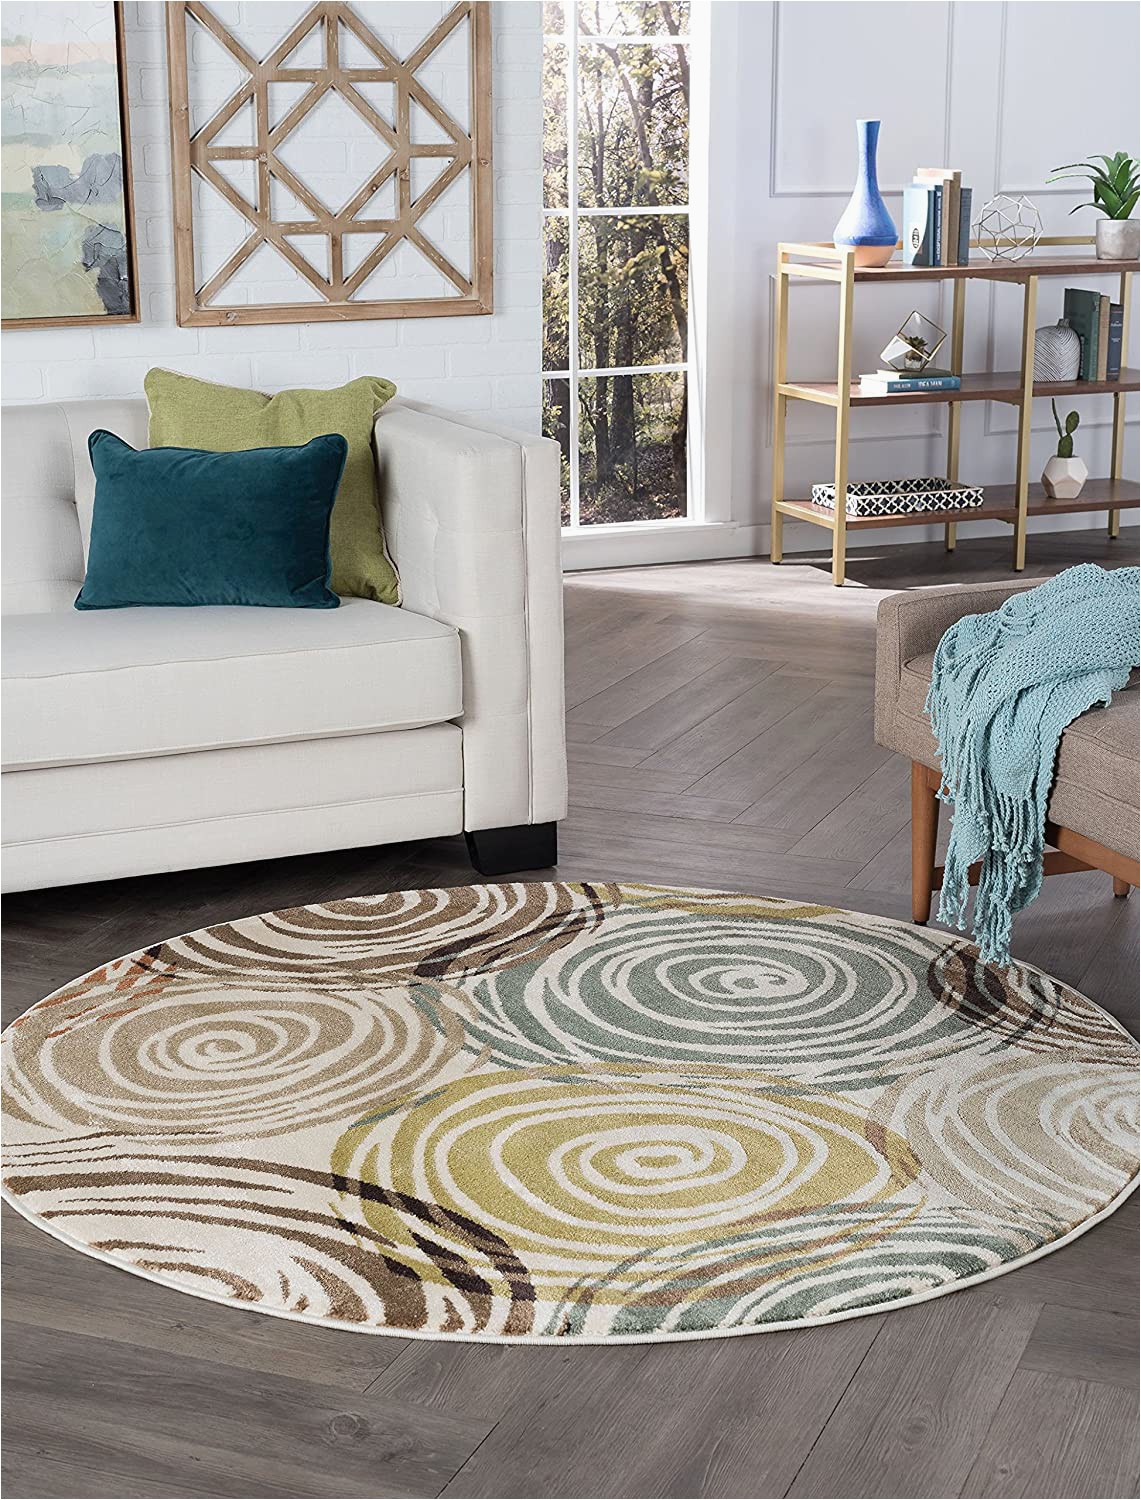 3 Foot Round area Rugs Universal Rugs 1016 Deco Round Contemporary area Rug 5 Feet 3 Inch Ivory